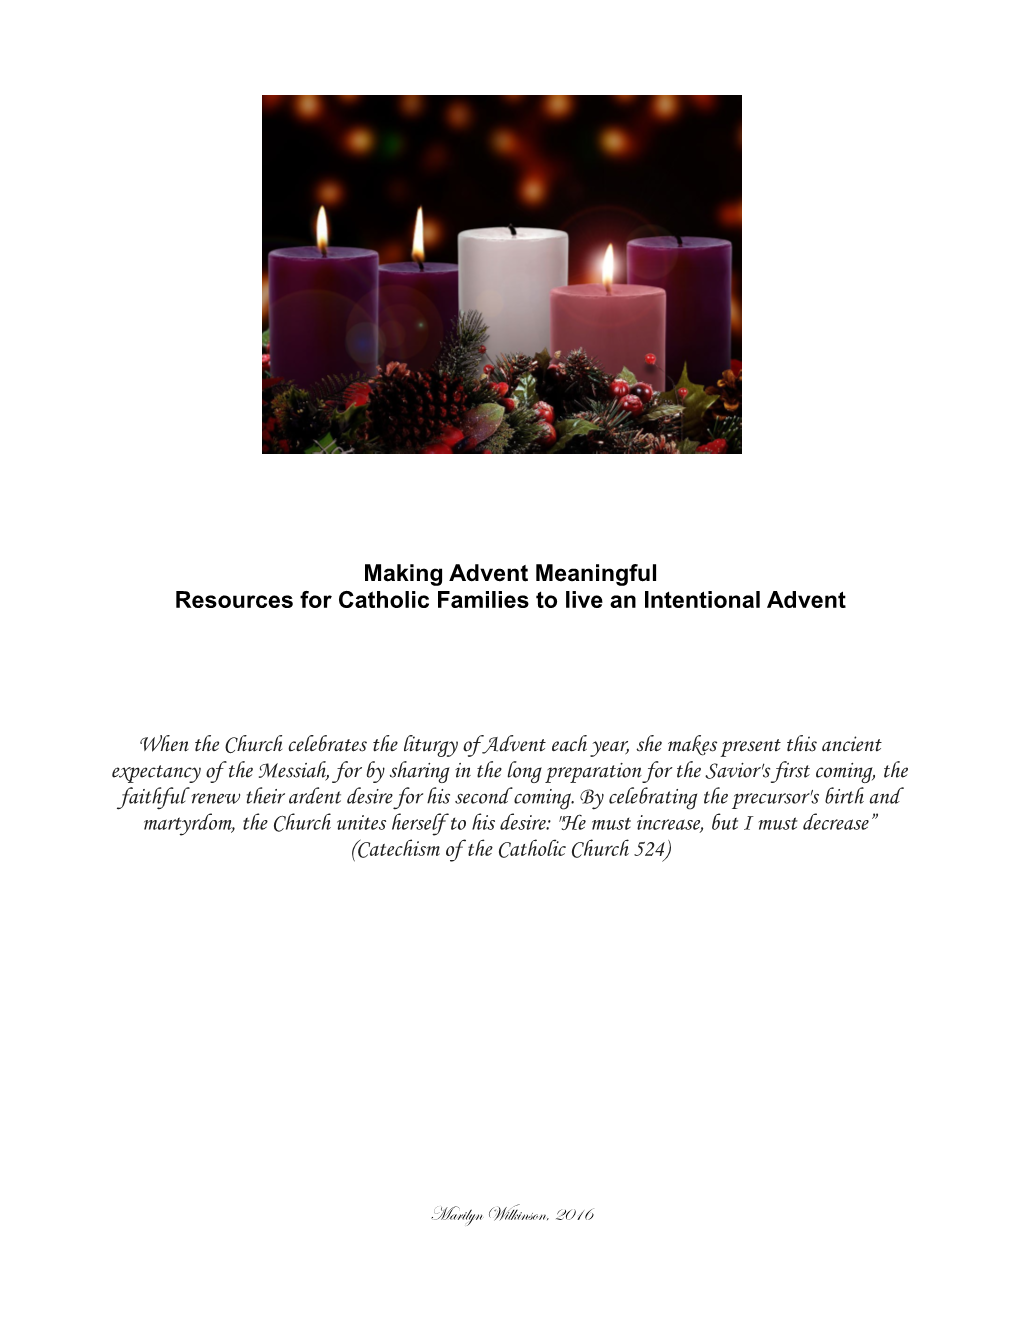 Making Advent Meaningful Resources for Catholic Families to Live an Intentional Advent